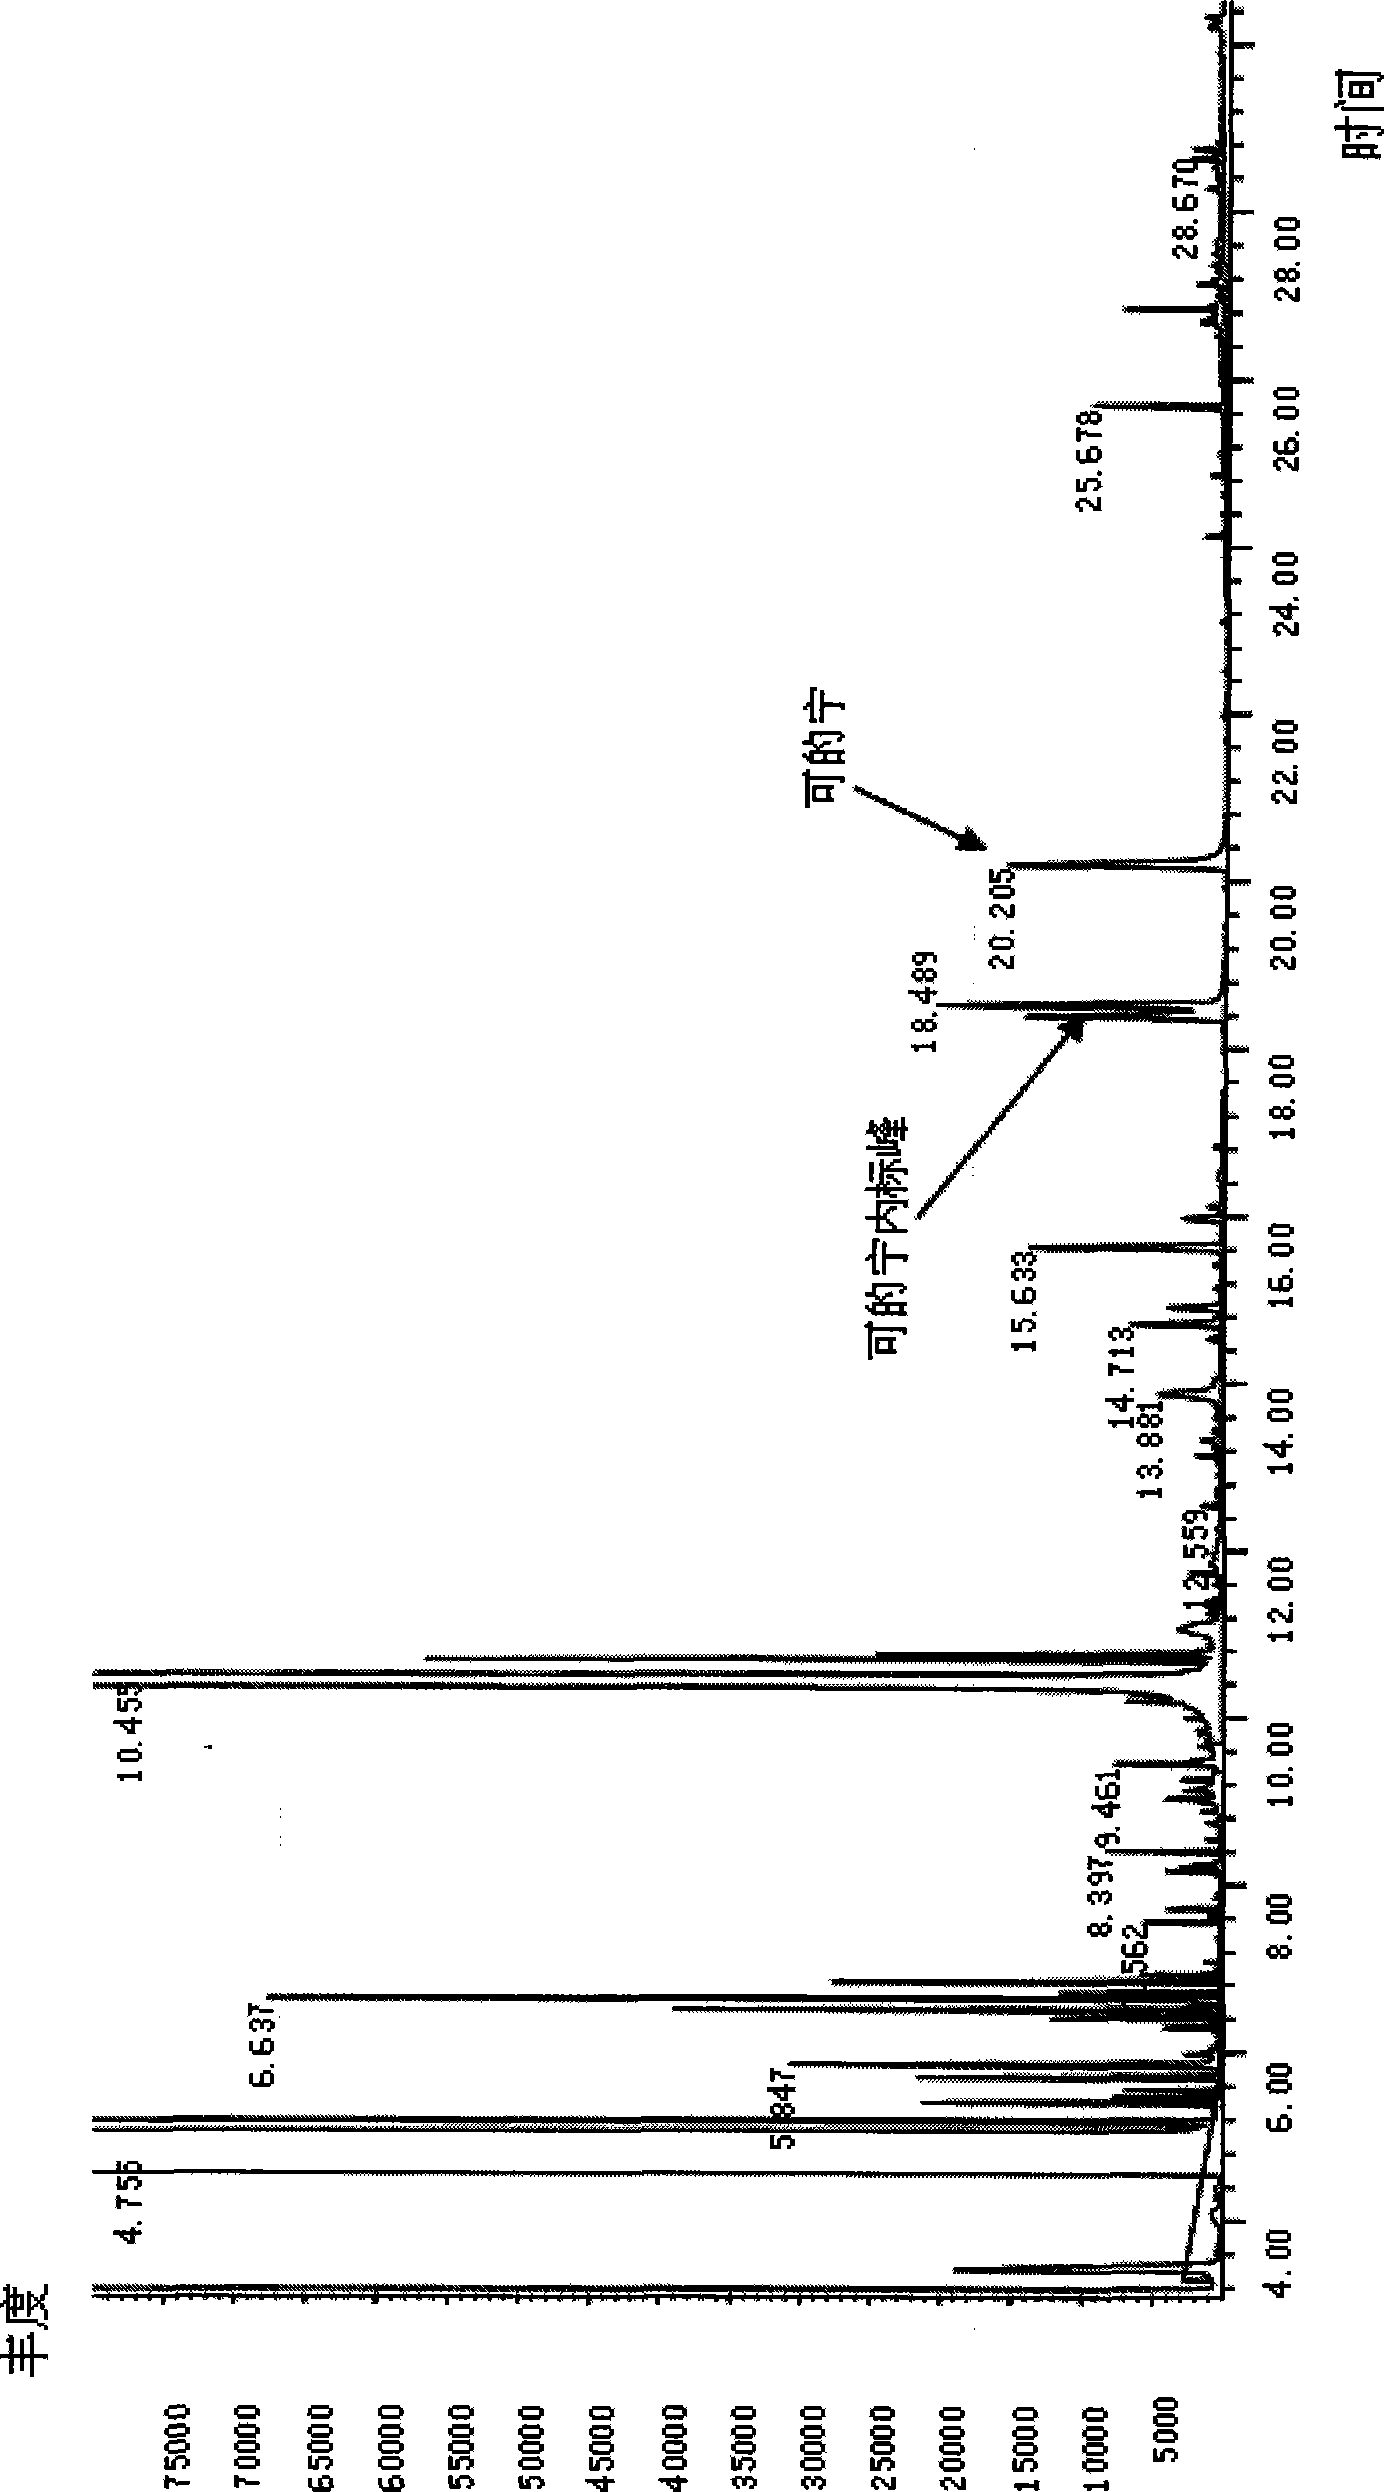 Method for simultaneously detecting cotinine, phenyl hydroxyacetic acid and phenylglyoxalic acid in human urine based on derivation method